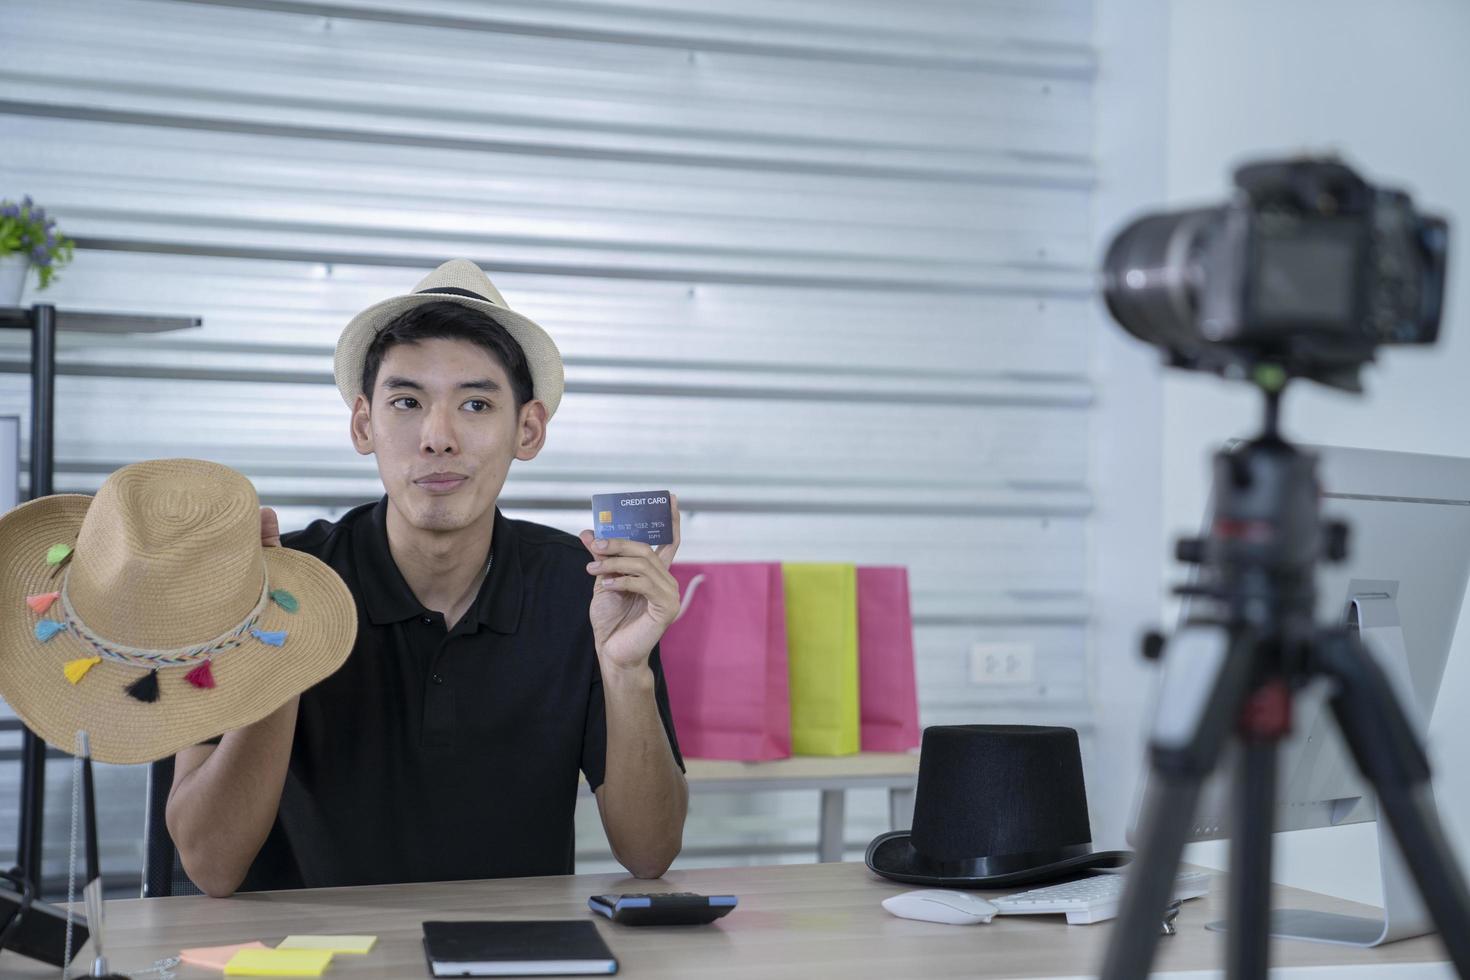 asian man blogger present and review product video broadcast live stream video to a social network. blogging, vlogging, online shopping, and social media concept photo